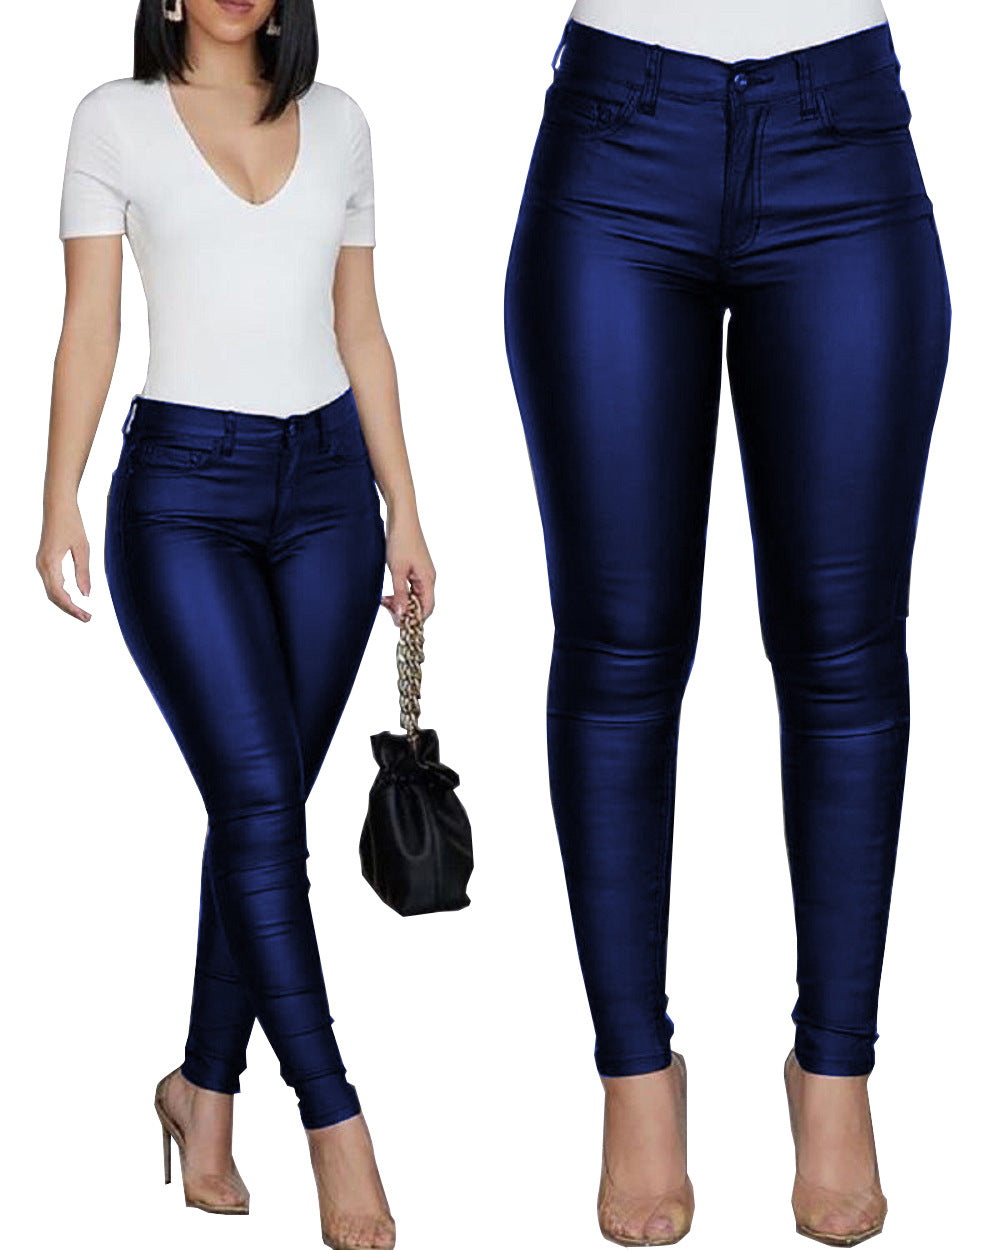 Solid Color Leisure Leather Pants Casual Sexy Skinny Women's Trousers